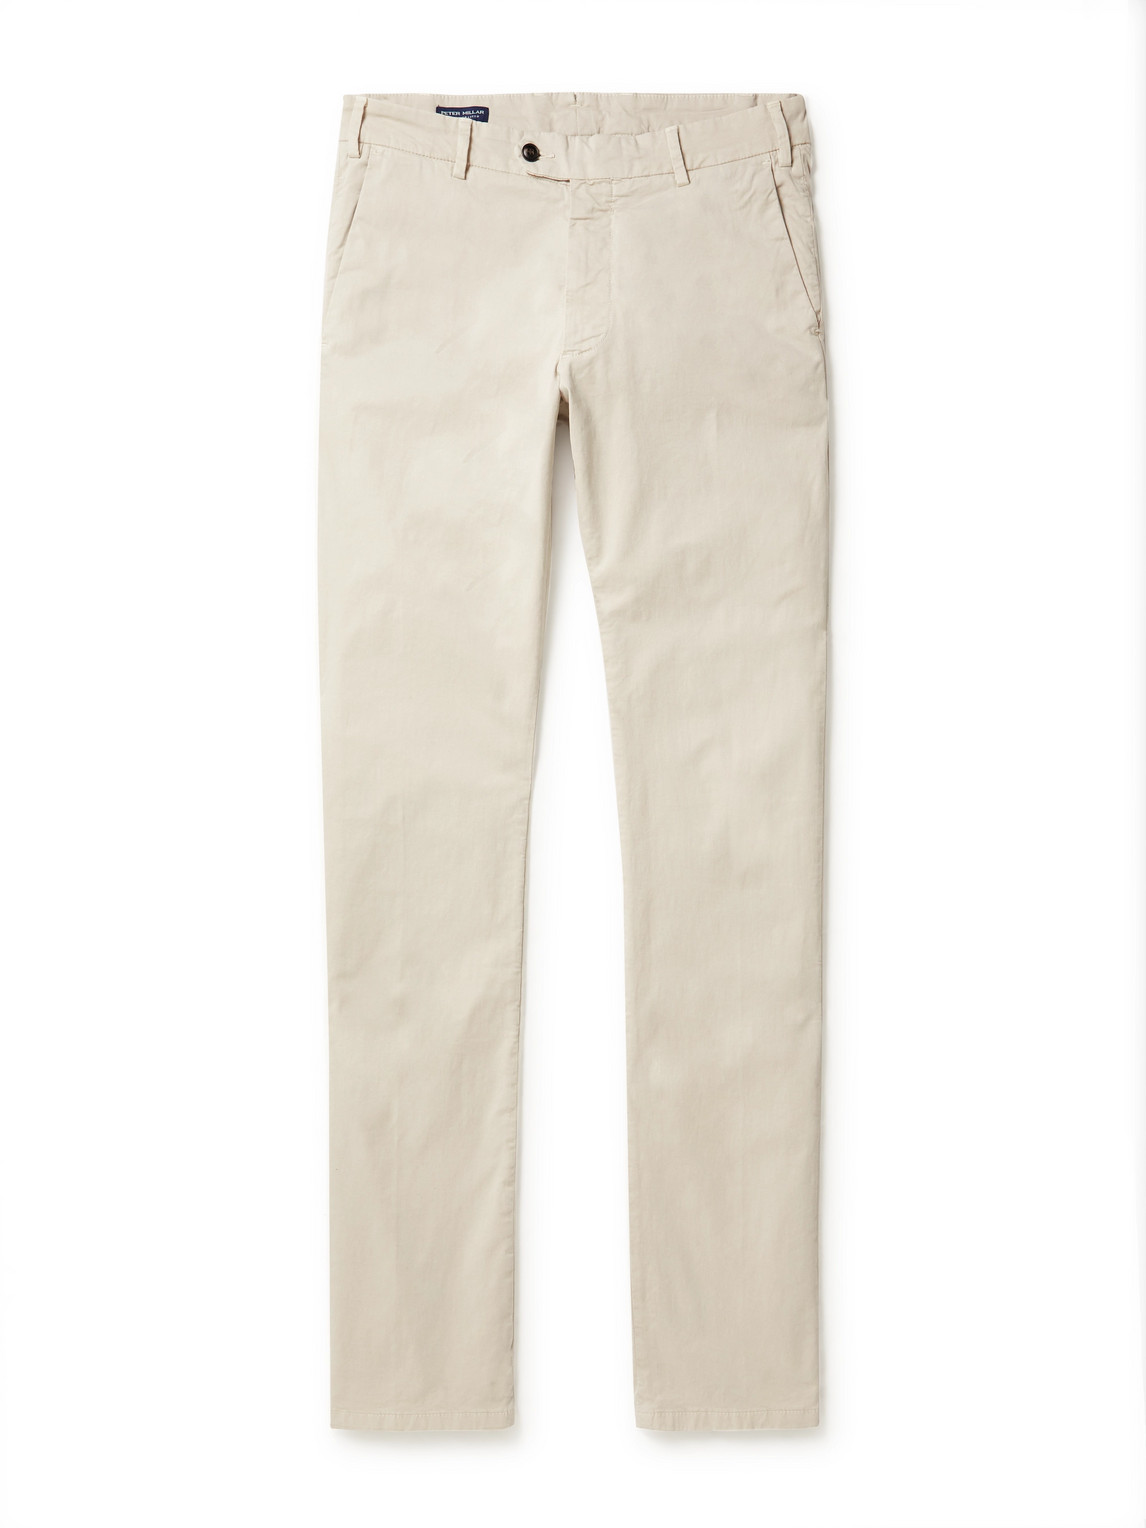 Peter Millar Concorde Garment-Dyed Stretch-Cotton Twill Trousers